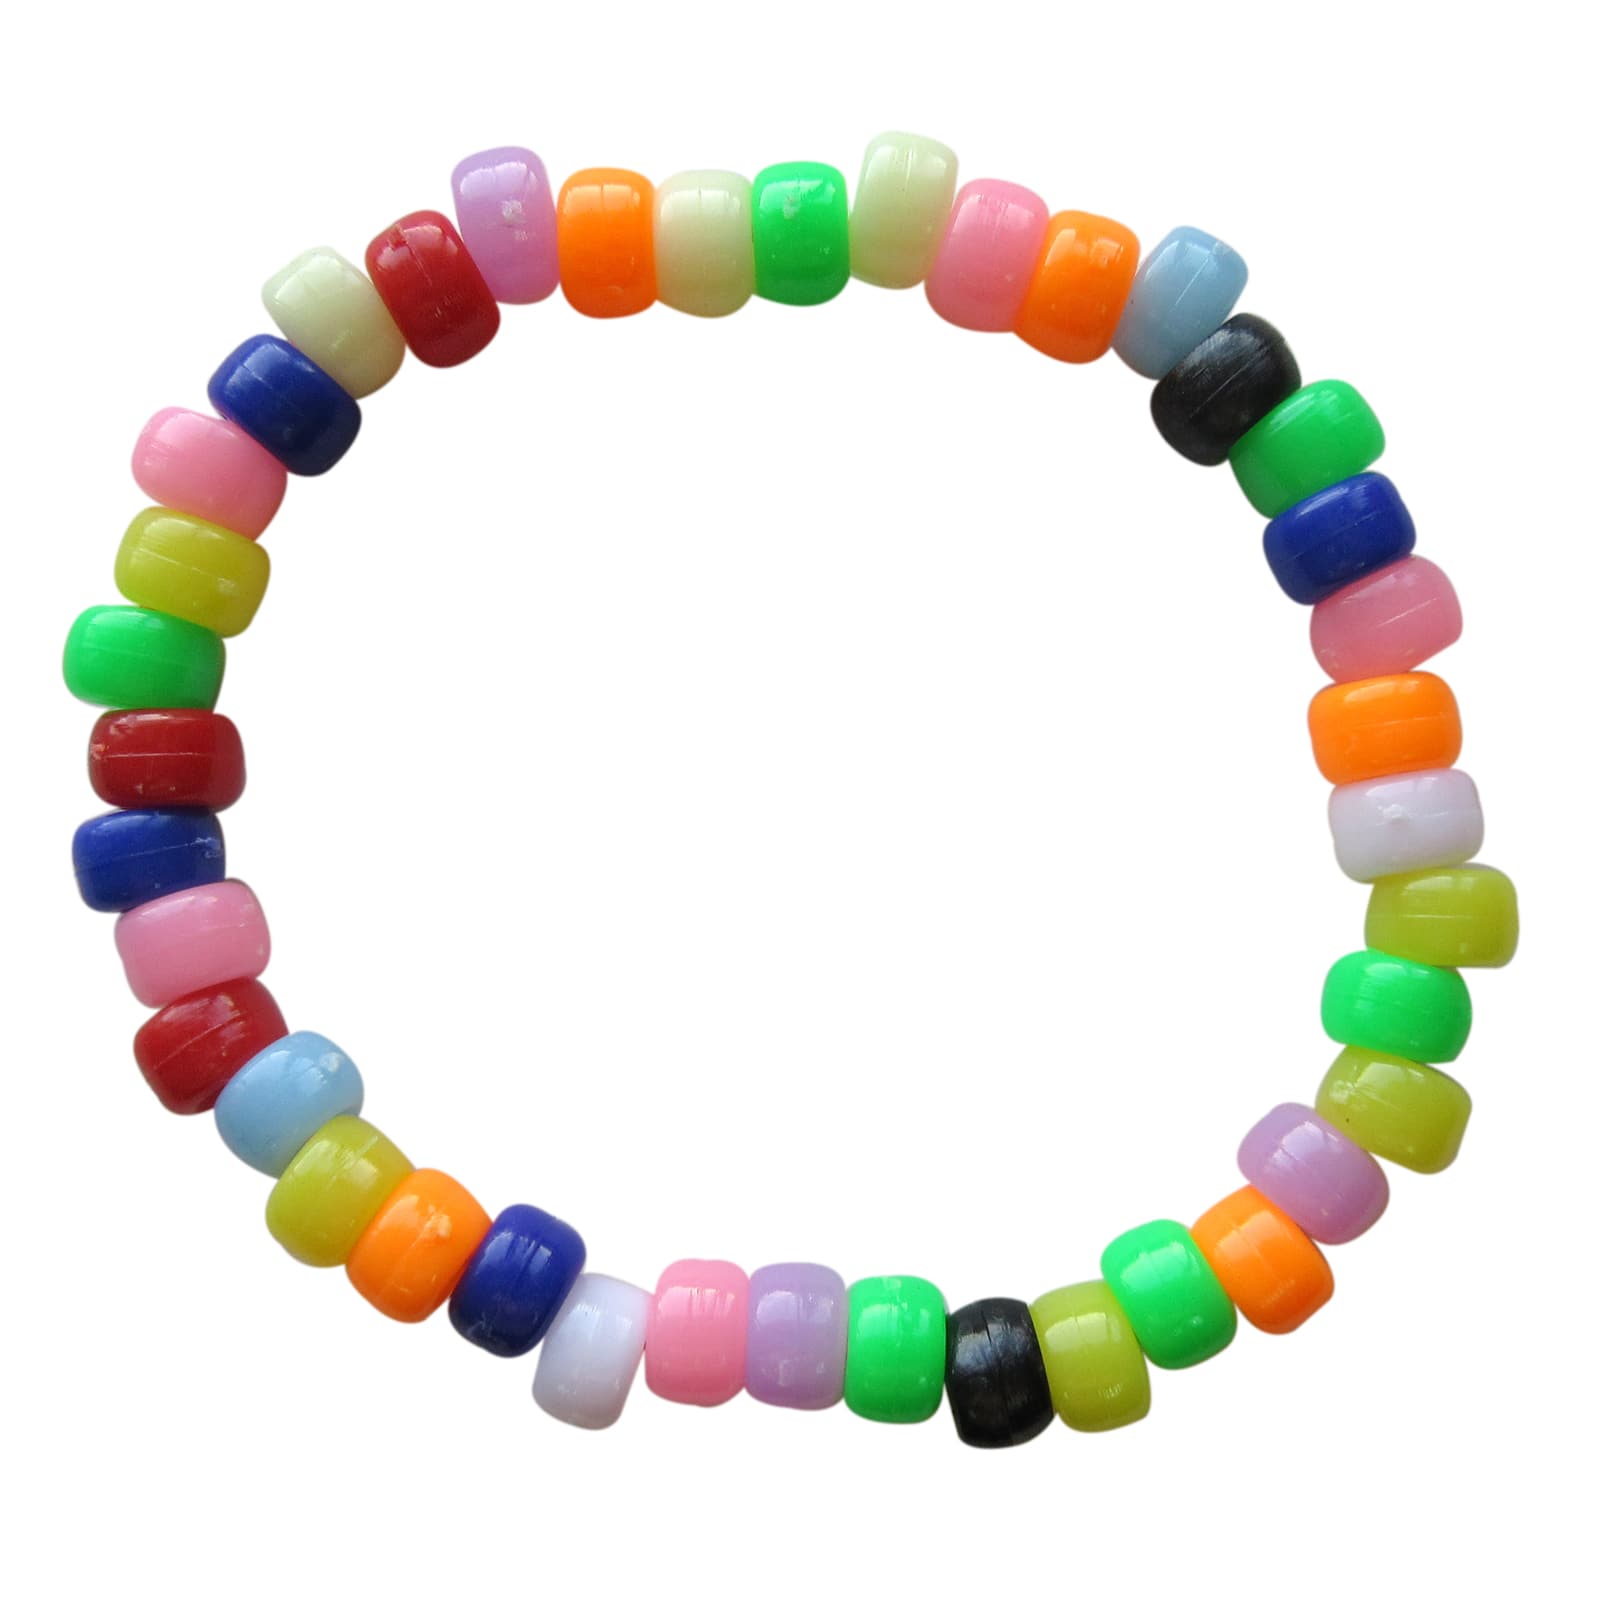 Bright Pony Beads by Creatology | 0.24 x 0.35 | Michaels